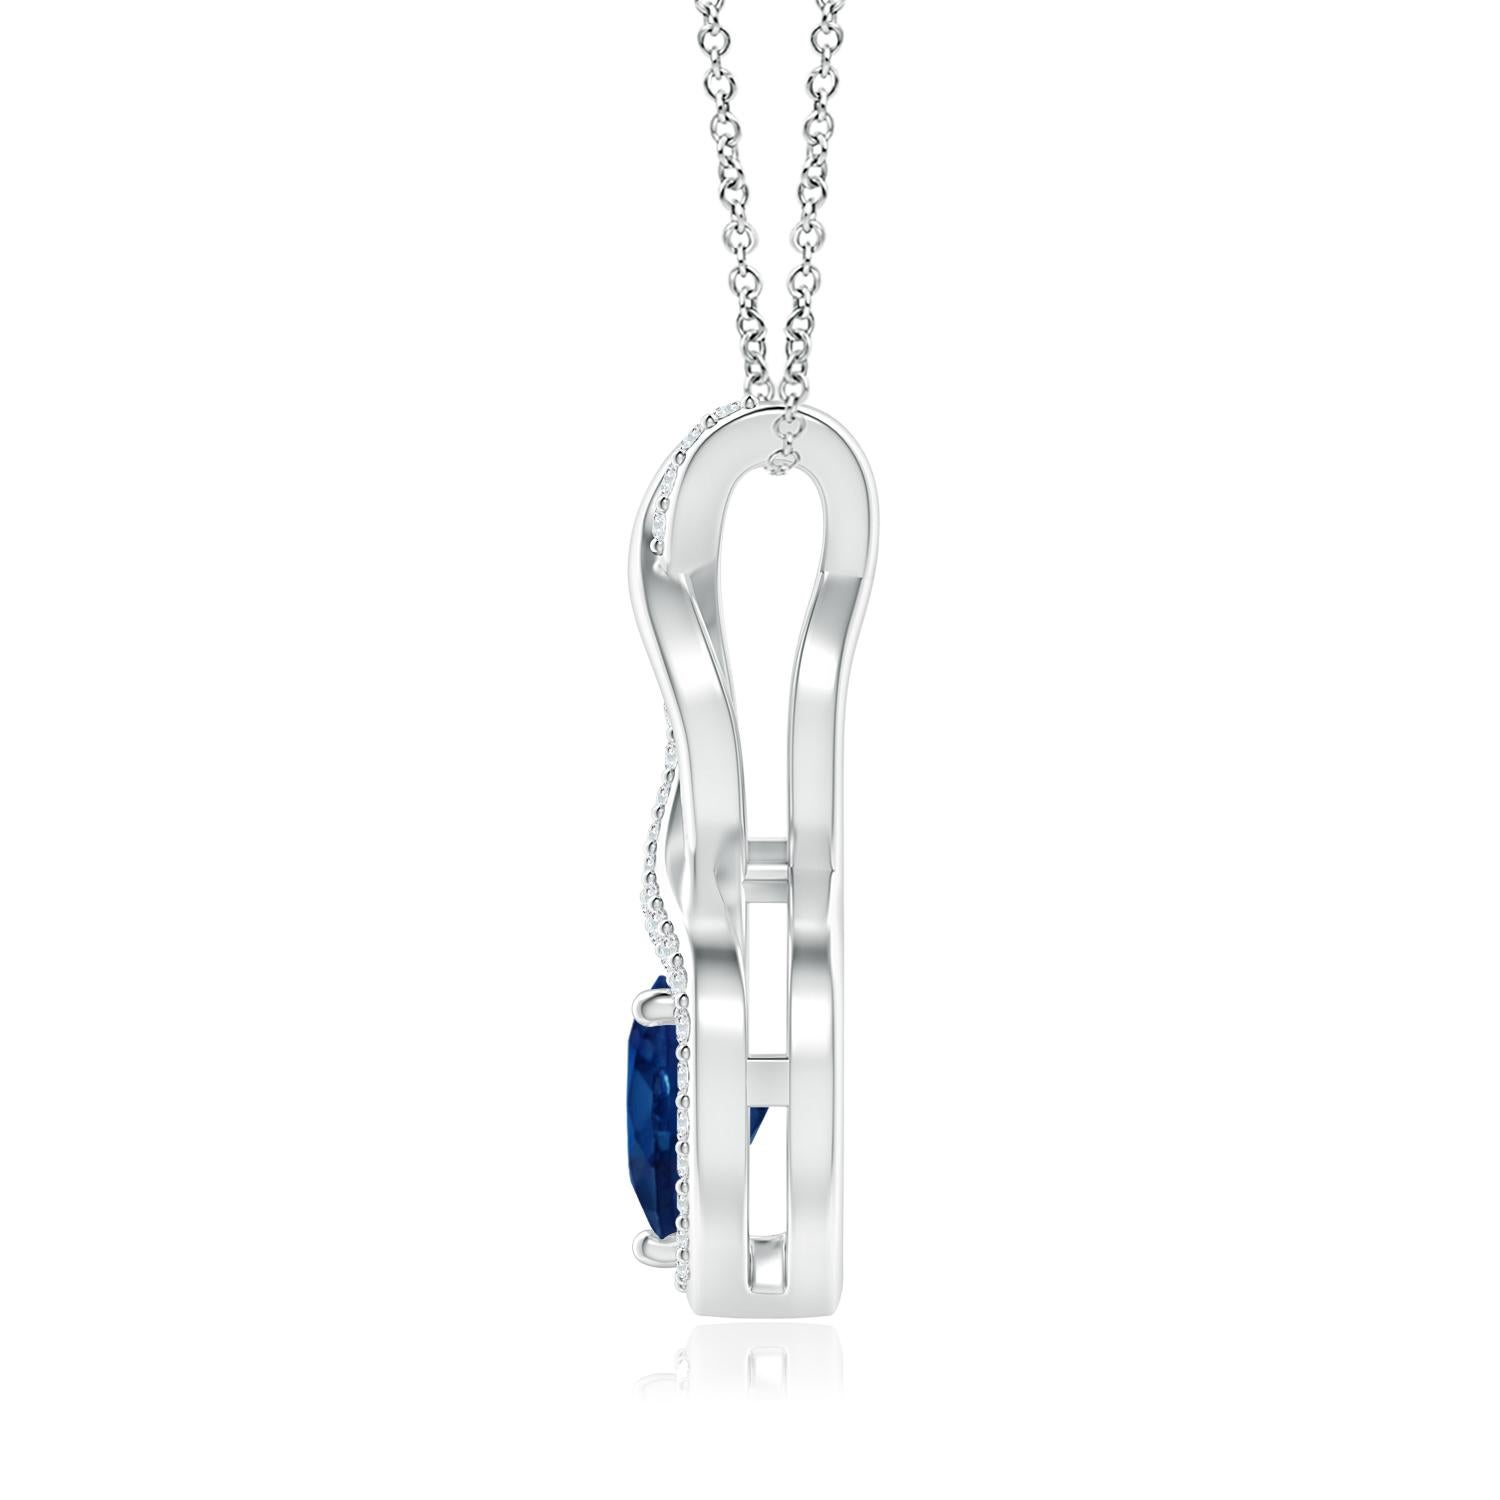 A diamond studded strip entwines with a lustrous metal strip to form an ornate infinity. Floating amid the graceful infinity is a beautiful heart-shaped blue sapphire in a prong setting. The sparkling diamonds infuse a captivating edge to this